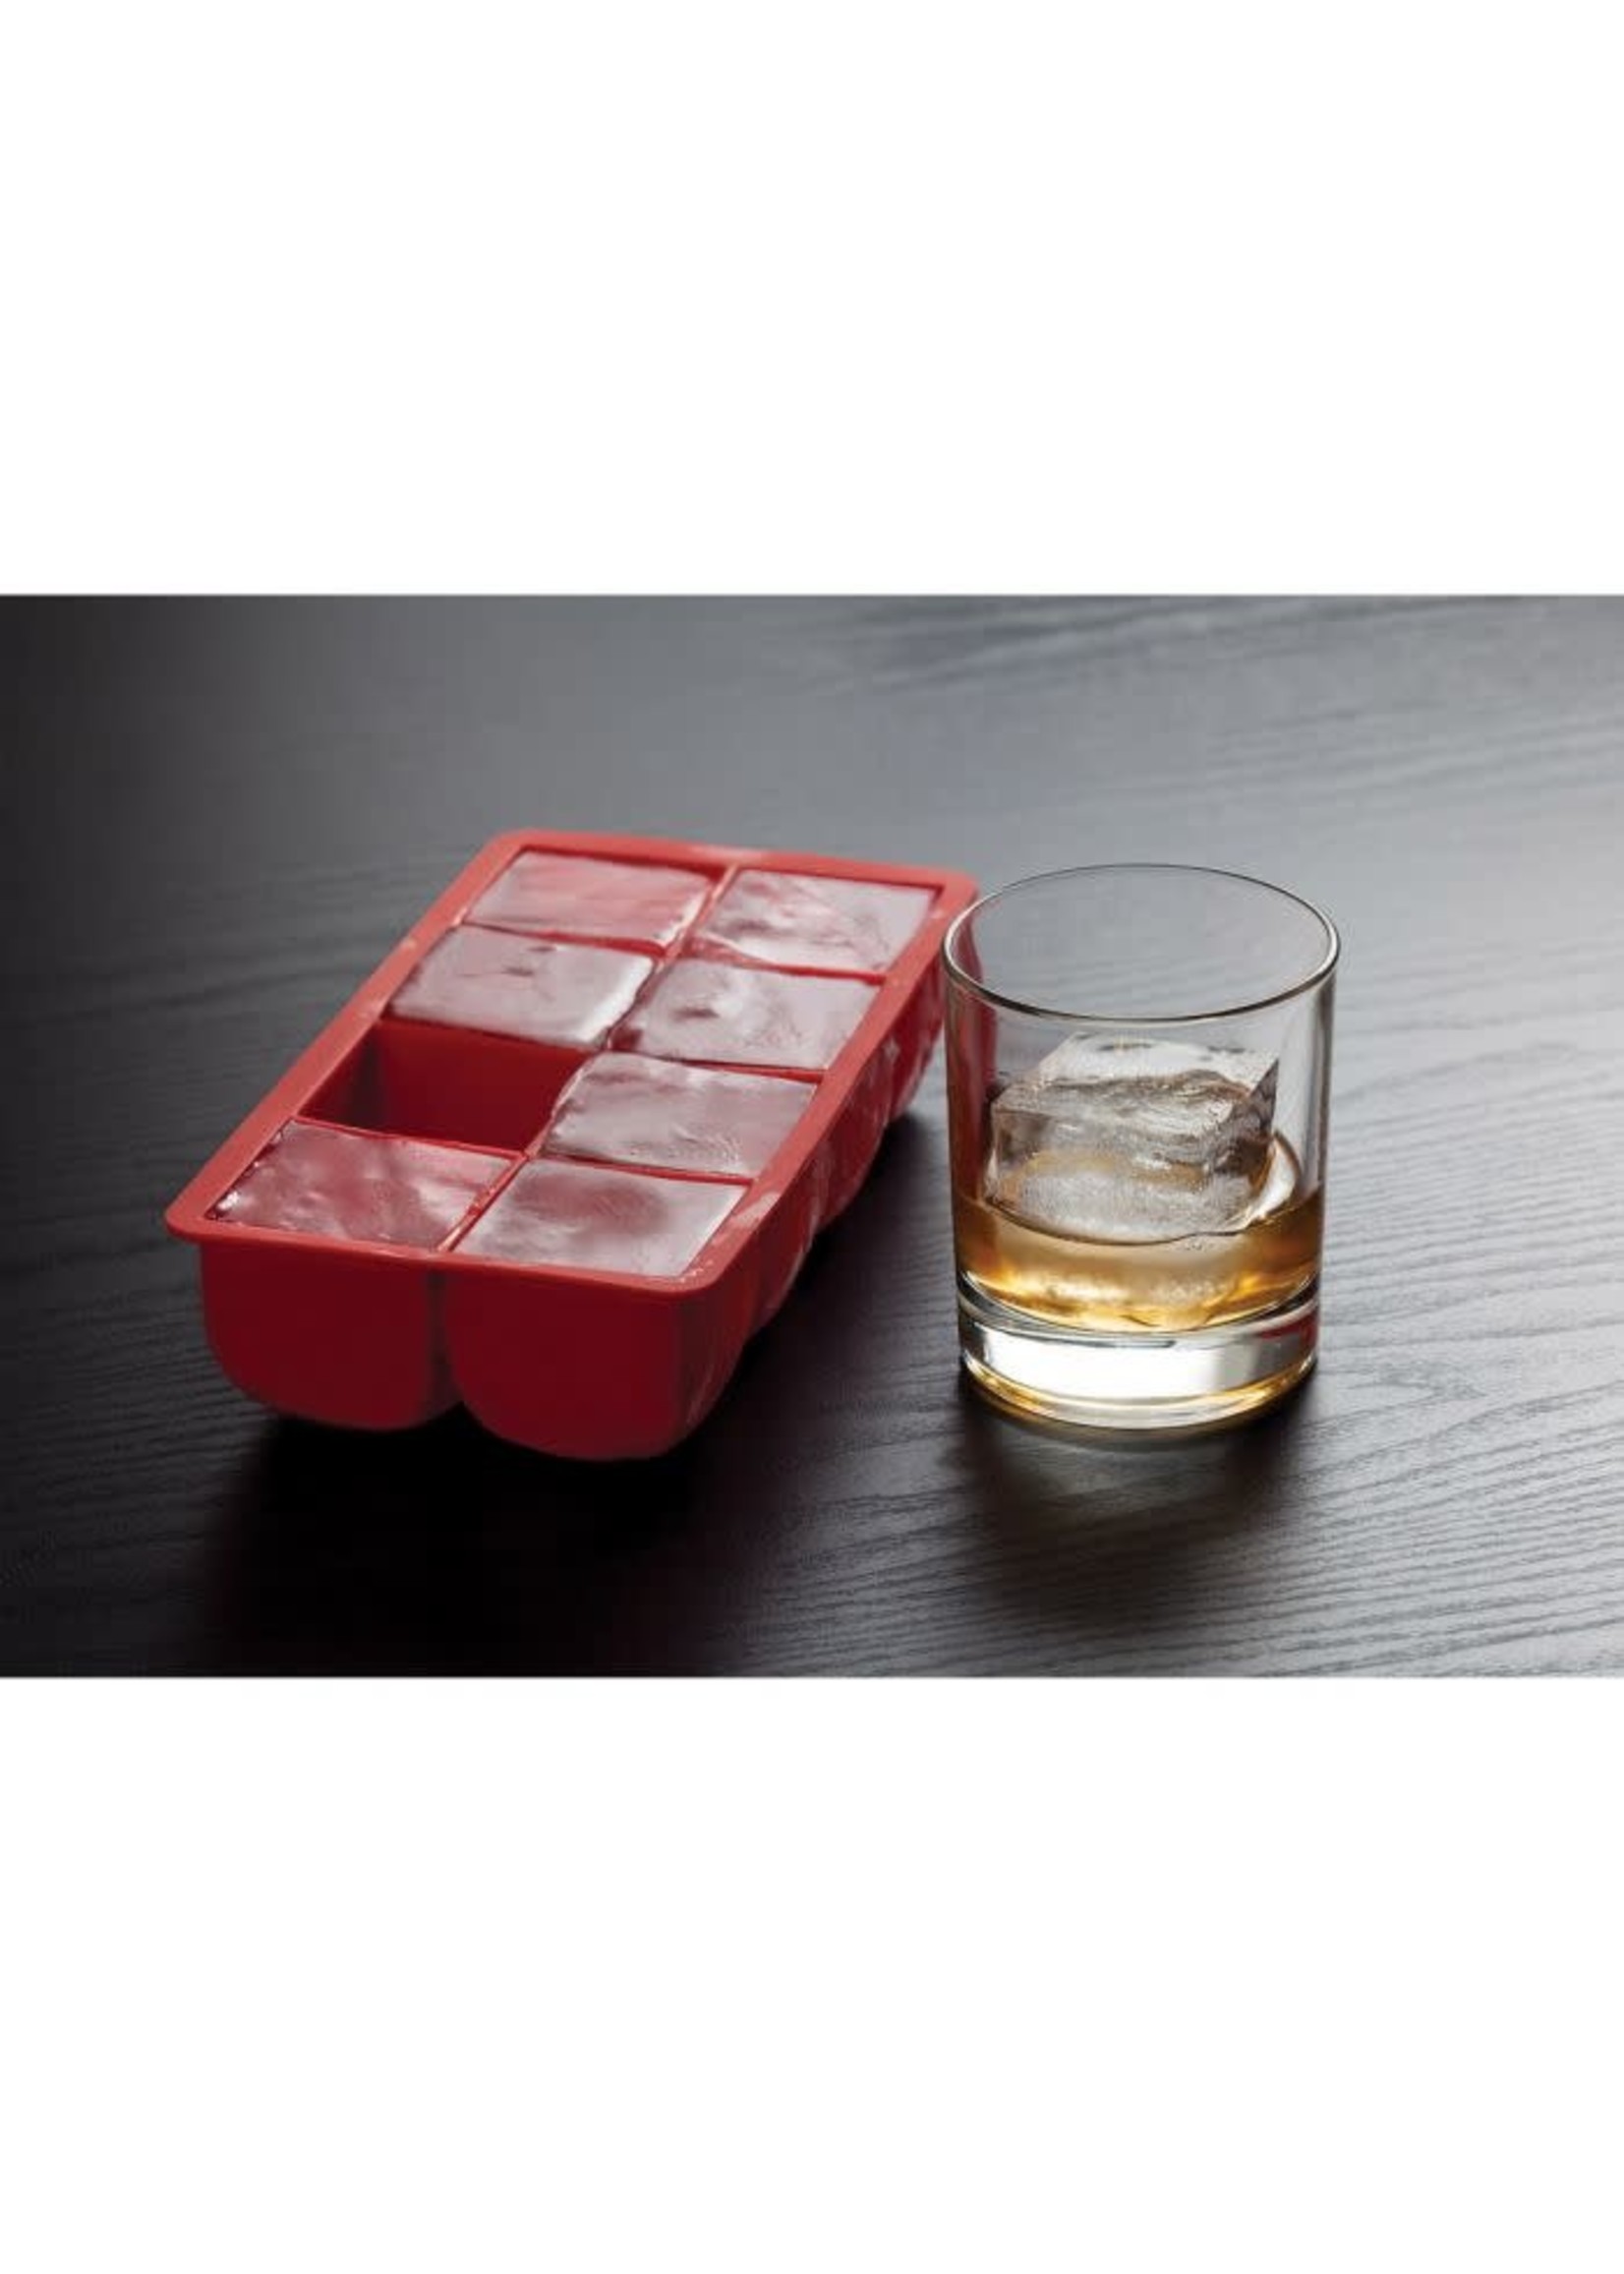 8 Cube Silicone Ice Cube Tray - Makes 8 Large 2 in. x 2 in. Cubes for